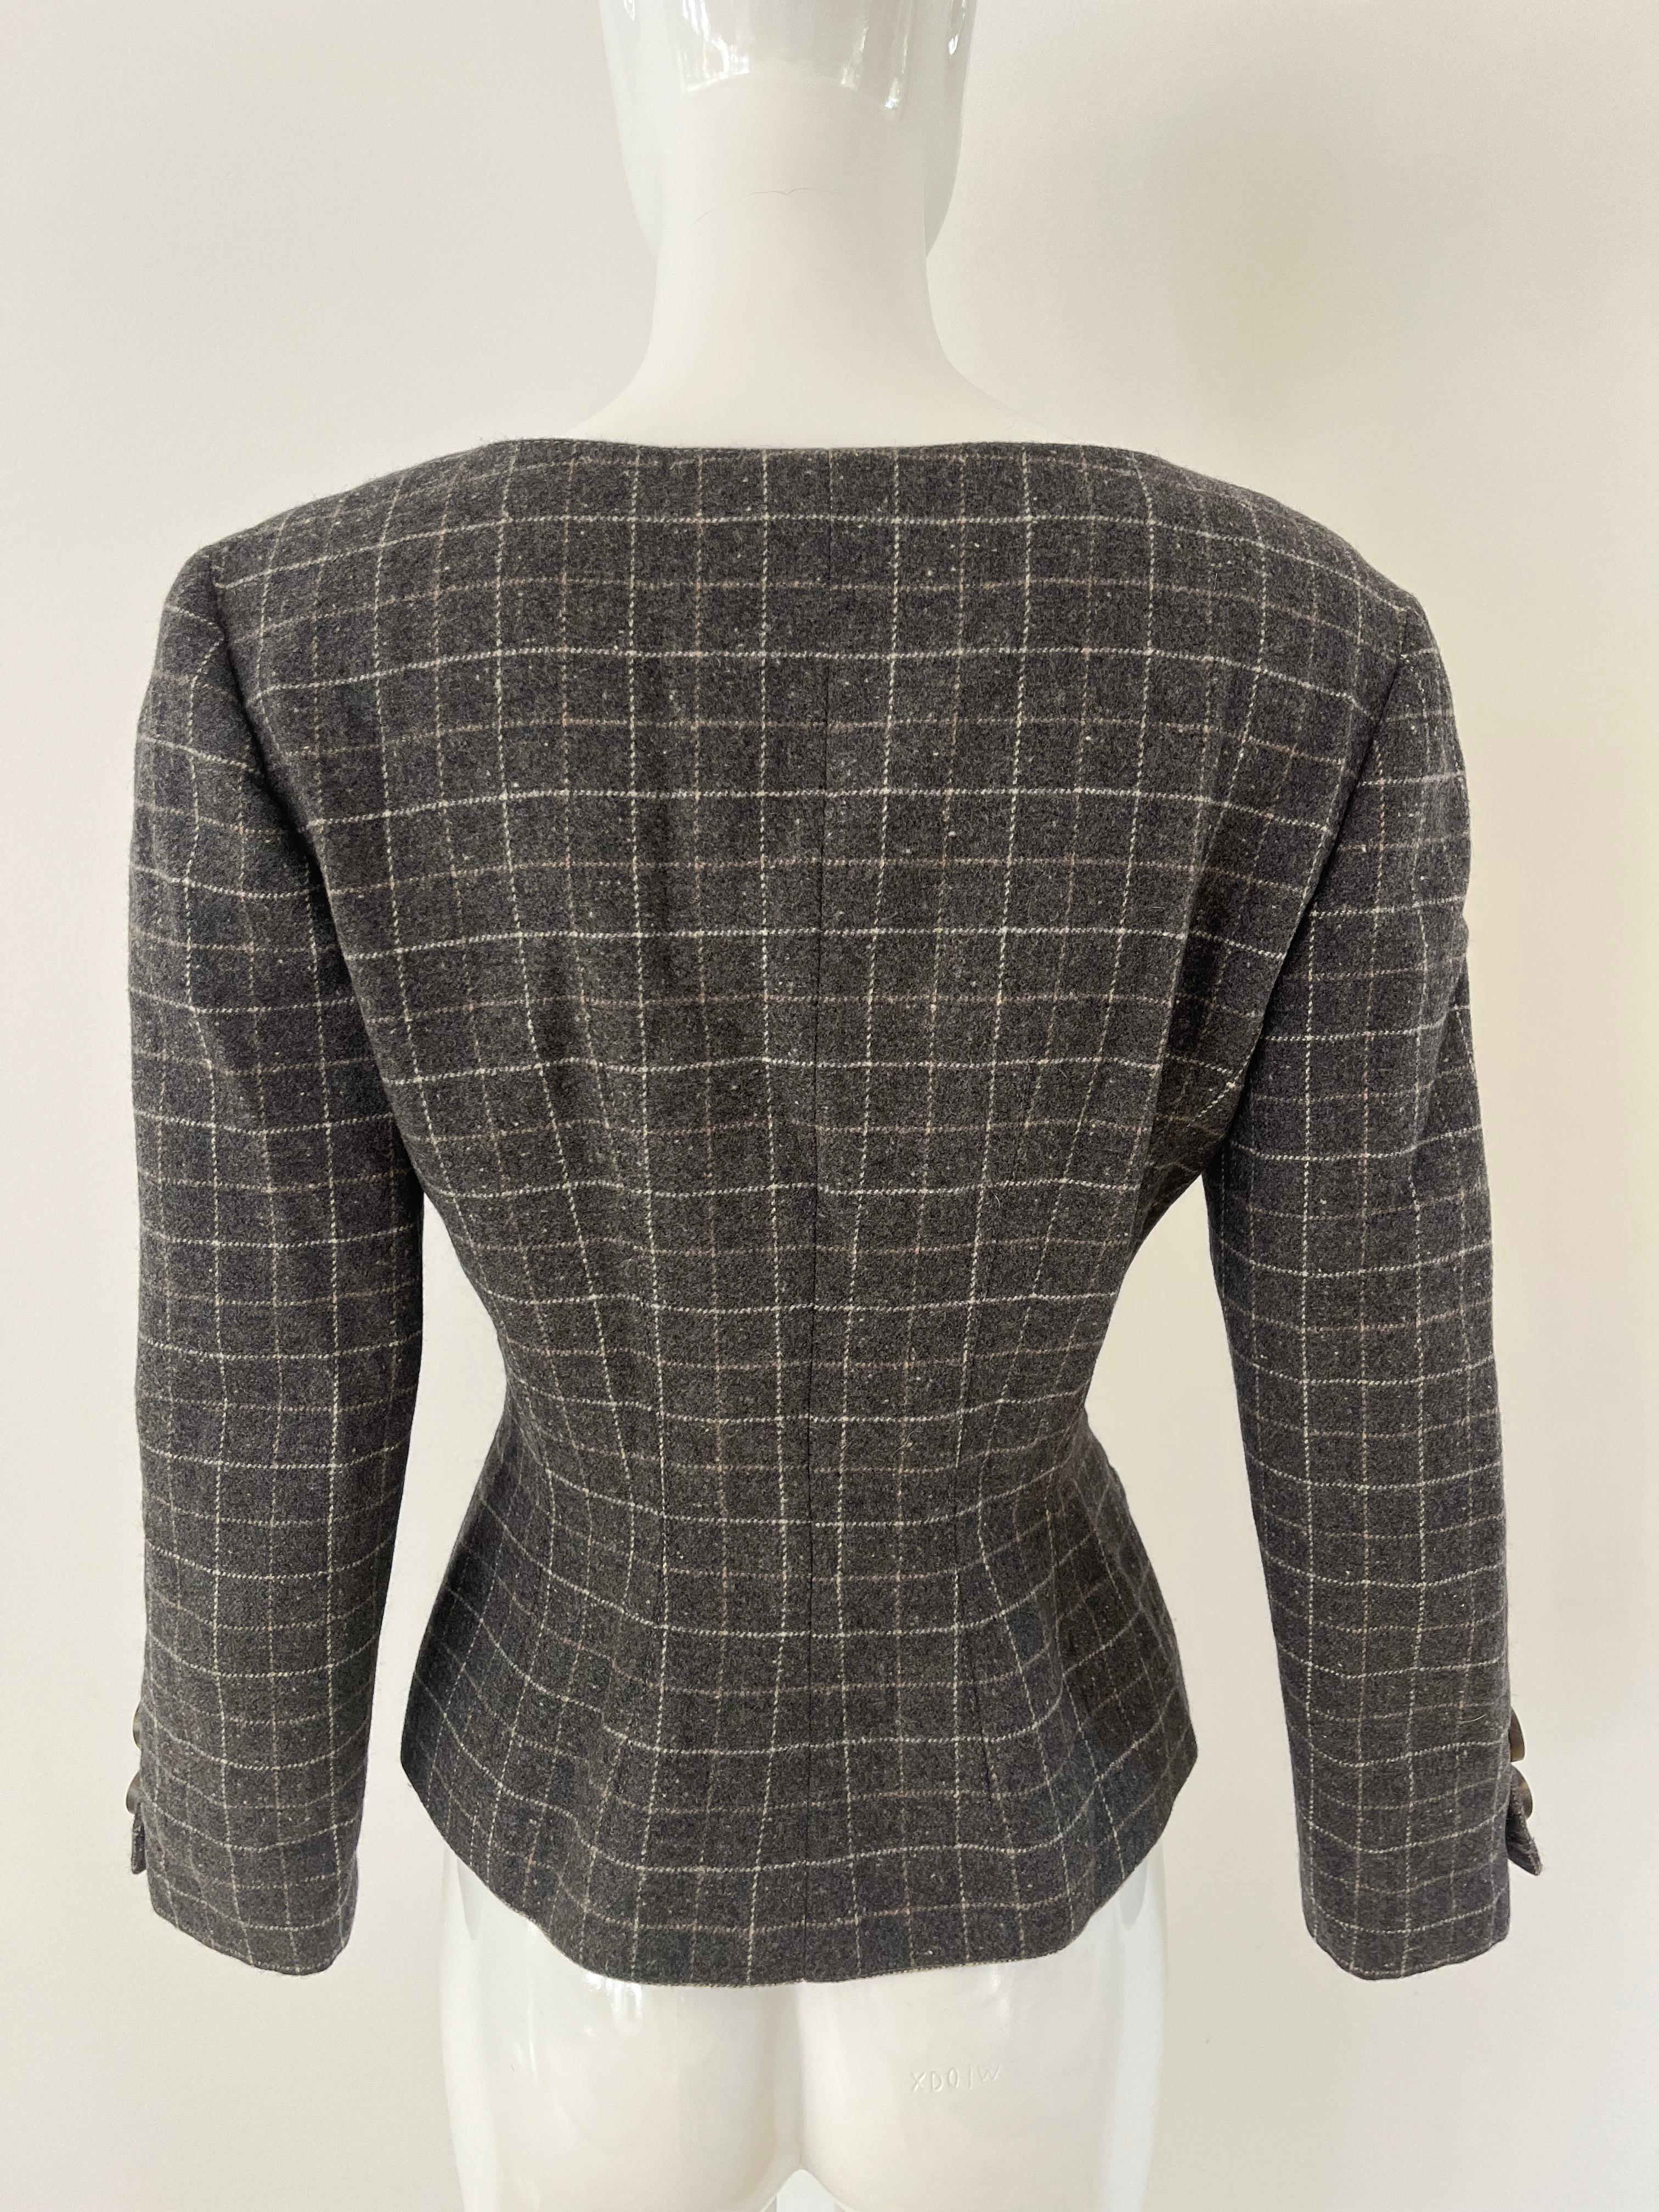 1980s Valentino V Studio Jacket in a soft speckled grey wool with windowpane design in a woven white and tan. Swirled resign buttons and a fitted waist silhouette with contouring seams.  Two front slash pockets and fully lined in black silk. 